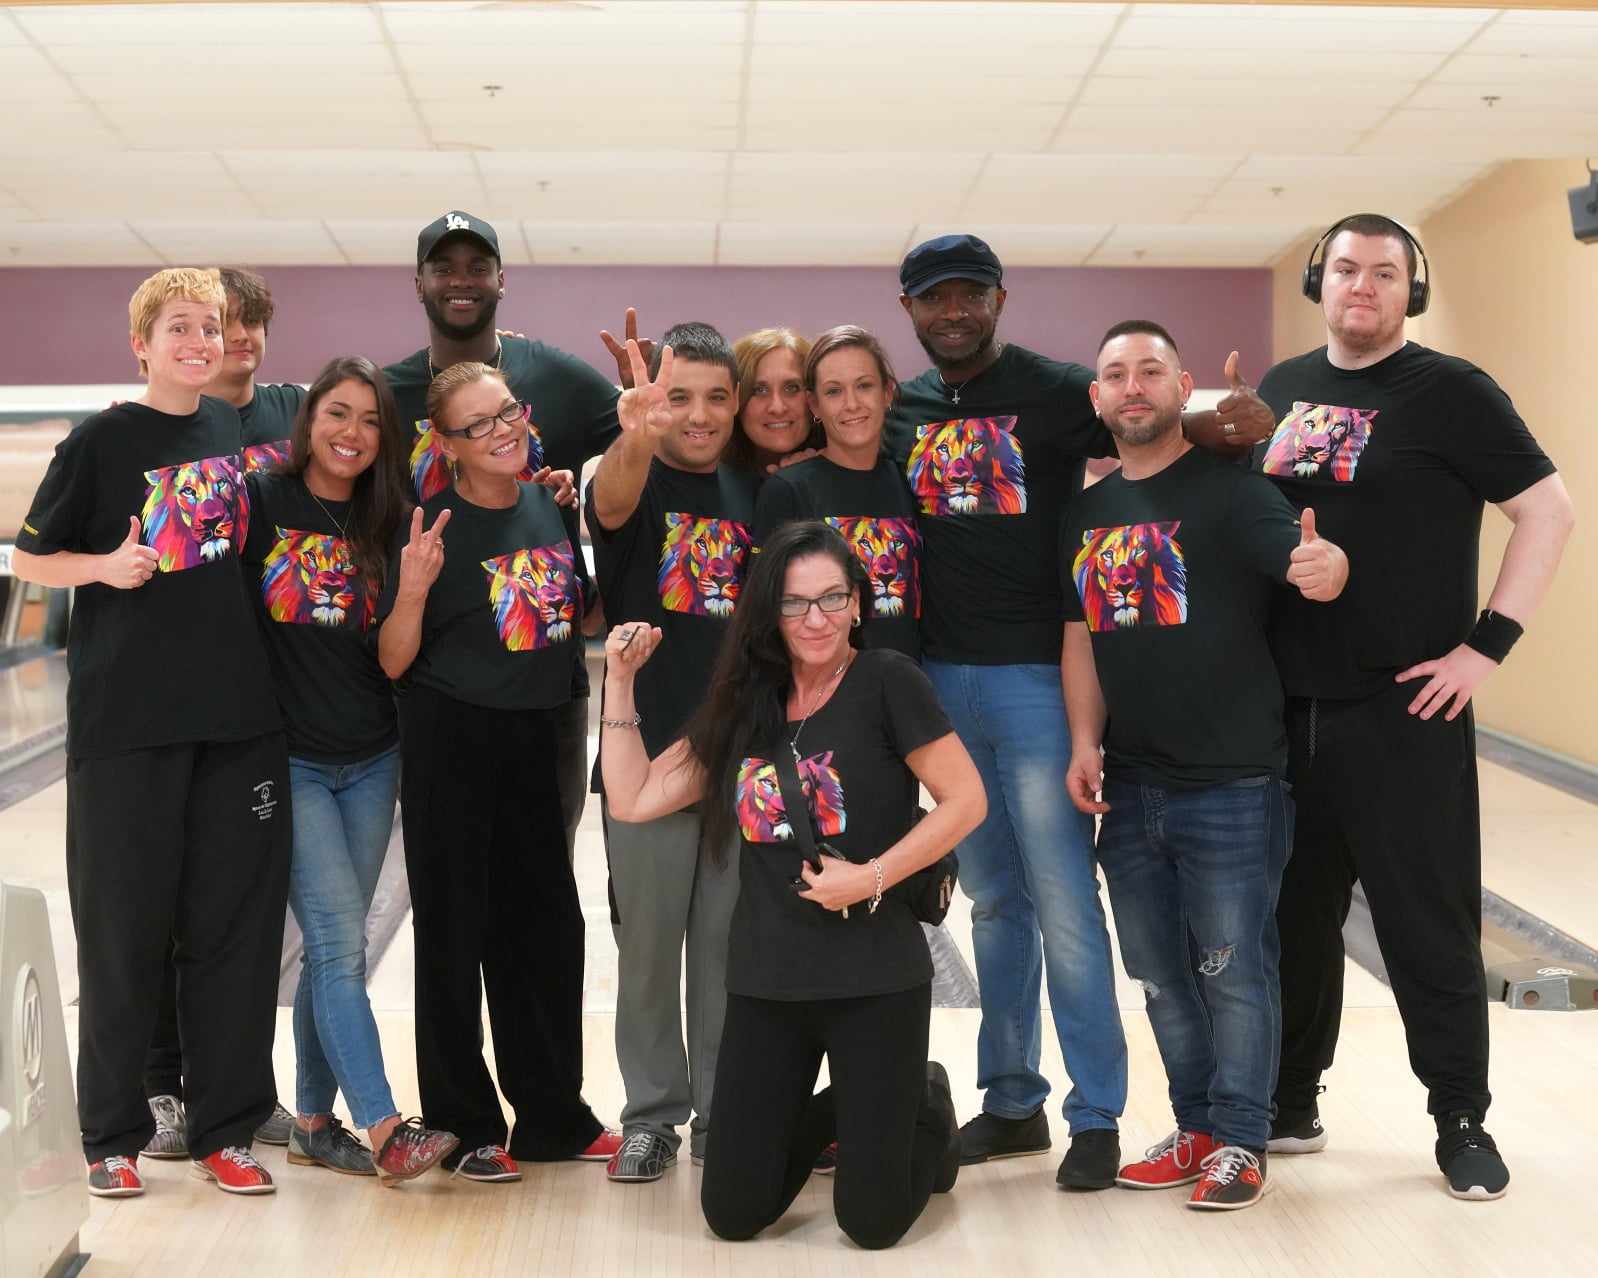 The Montreal Autism Community Lions Club (MACLC) strikes a pose during their bowling fundraiser on October 21. Founder of MACLC Lori-Ann Zemanovich is seen kneeling in the front row. Photo: Kevin J Raftery, PCJ Sport Photography 